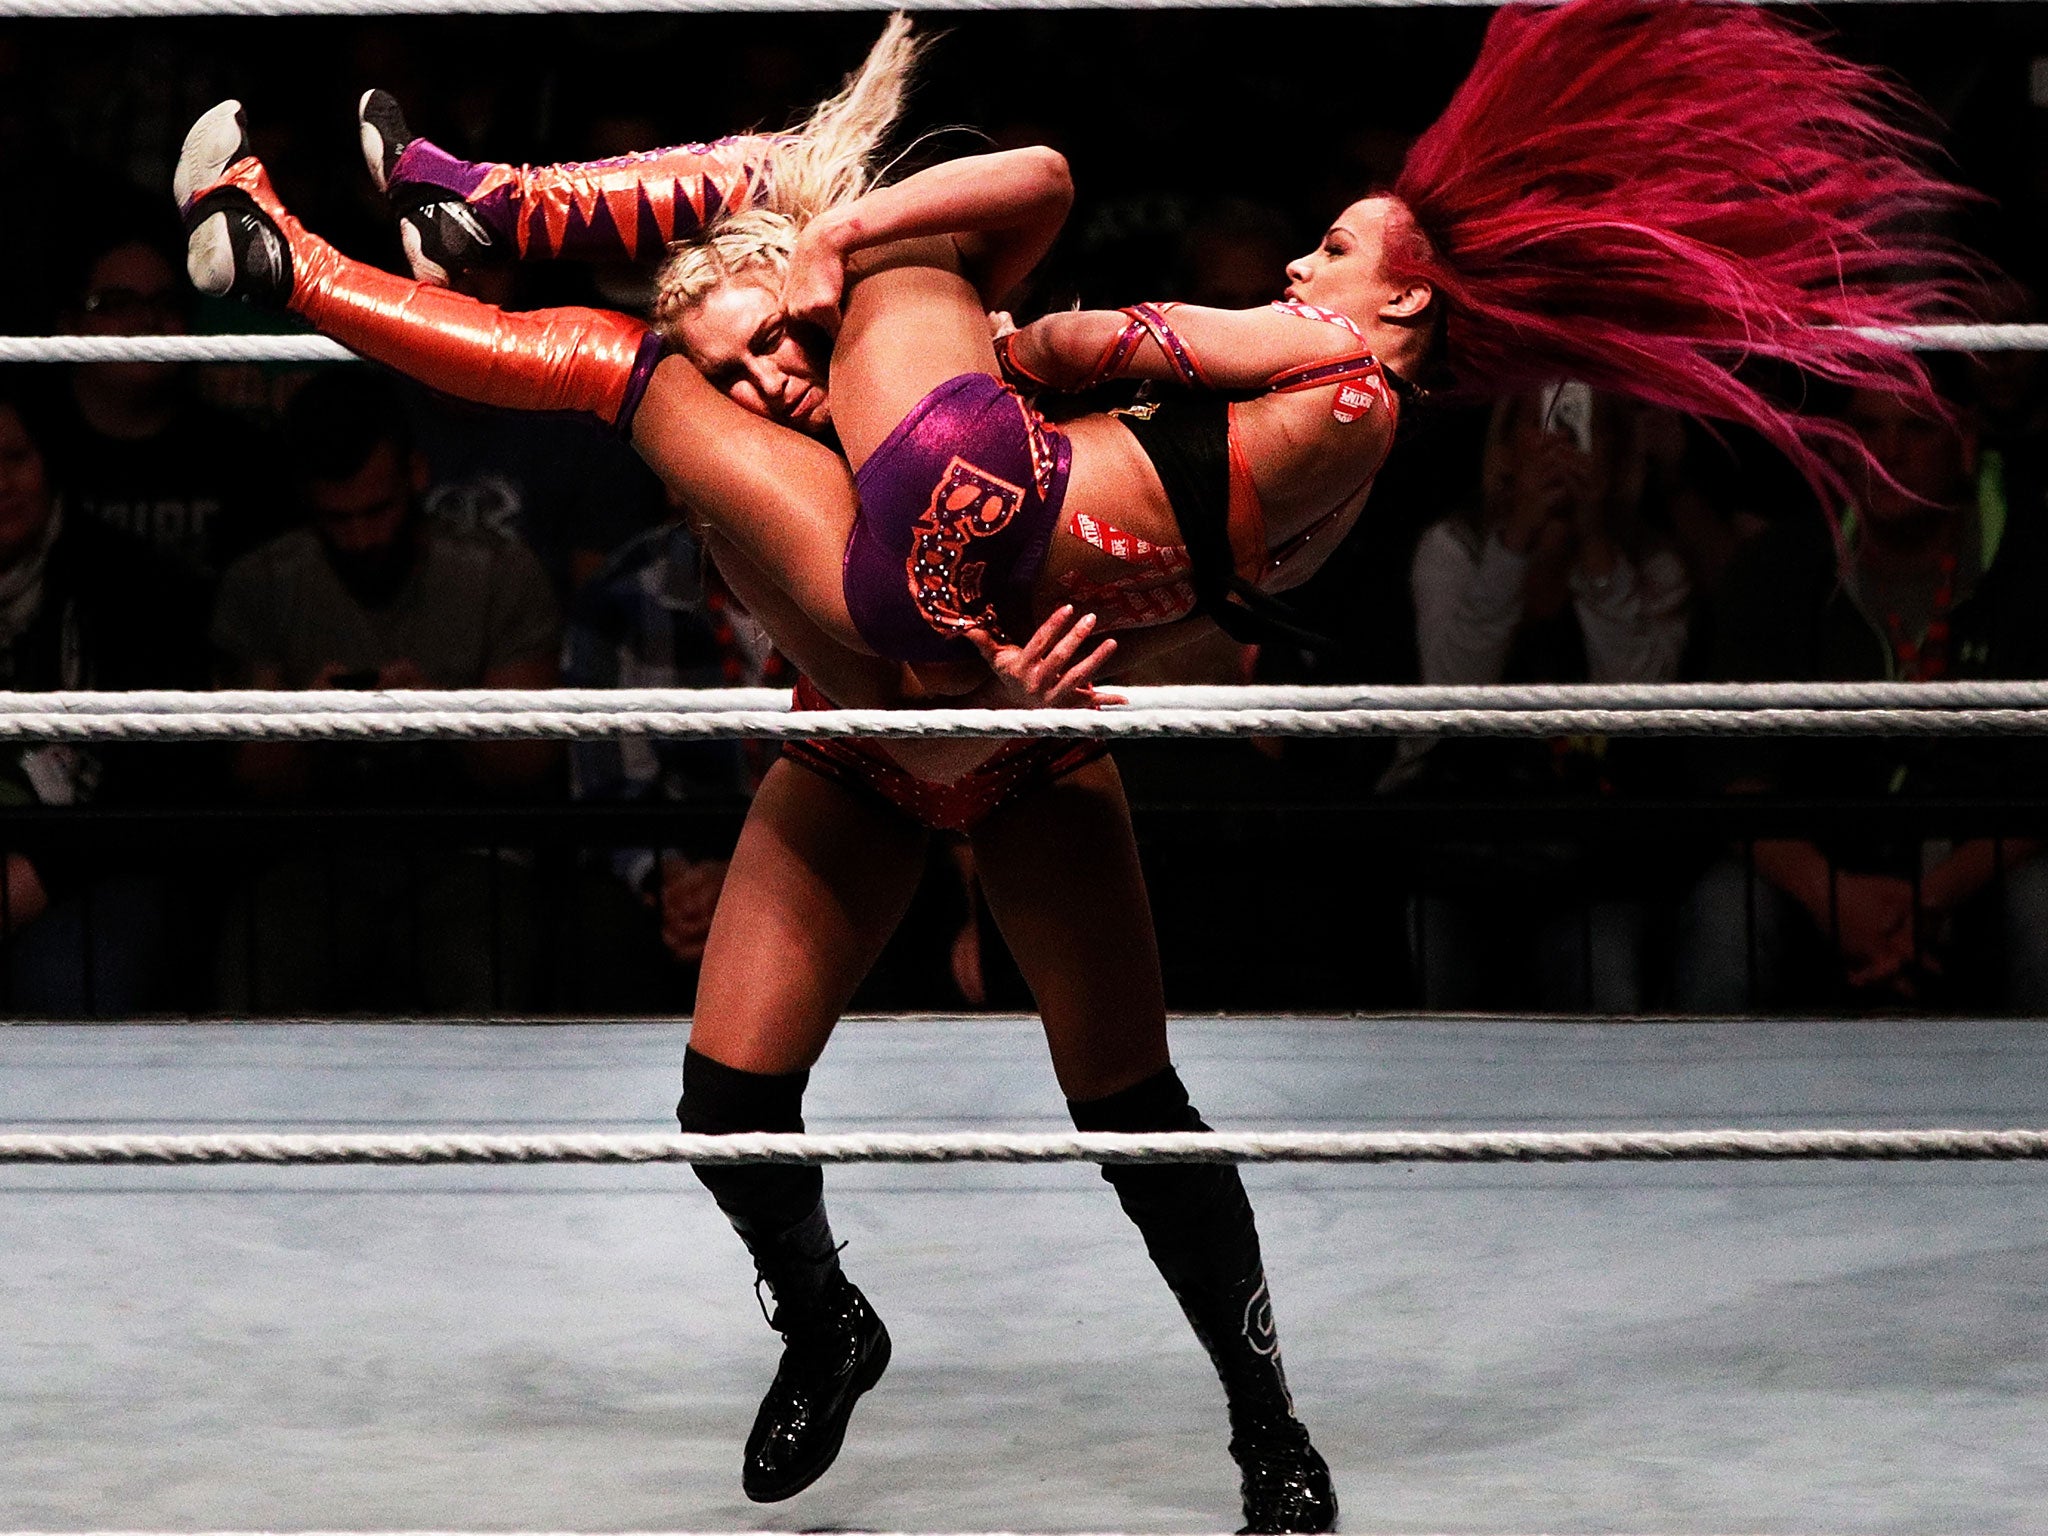 The likes of Charlotte Flair and Sasha Banks have taken the WWE by storm